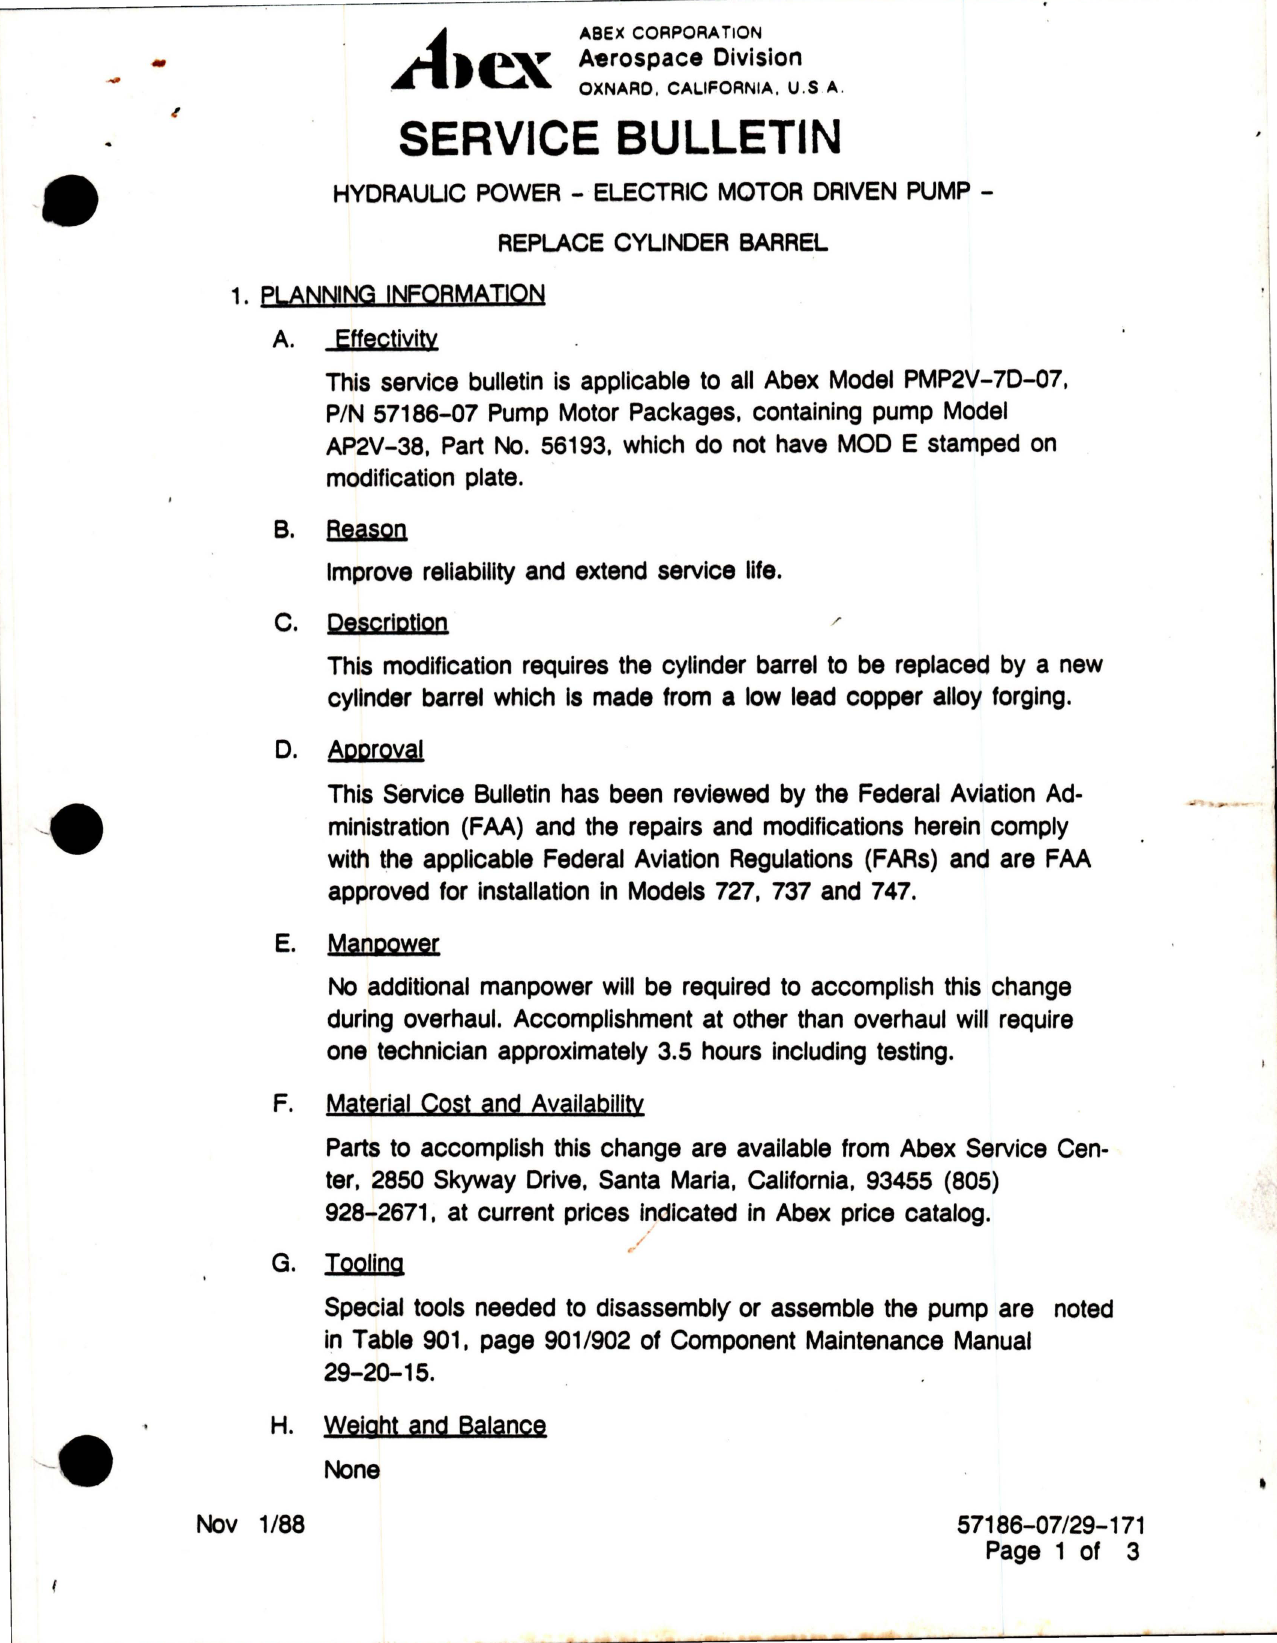 Sample page 1 from AirCorps Library document: Abex Hydraulic Power Electric Motor Driven Pump - Replace Cylinder Barrel